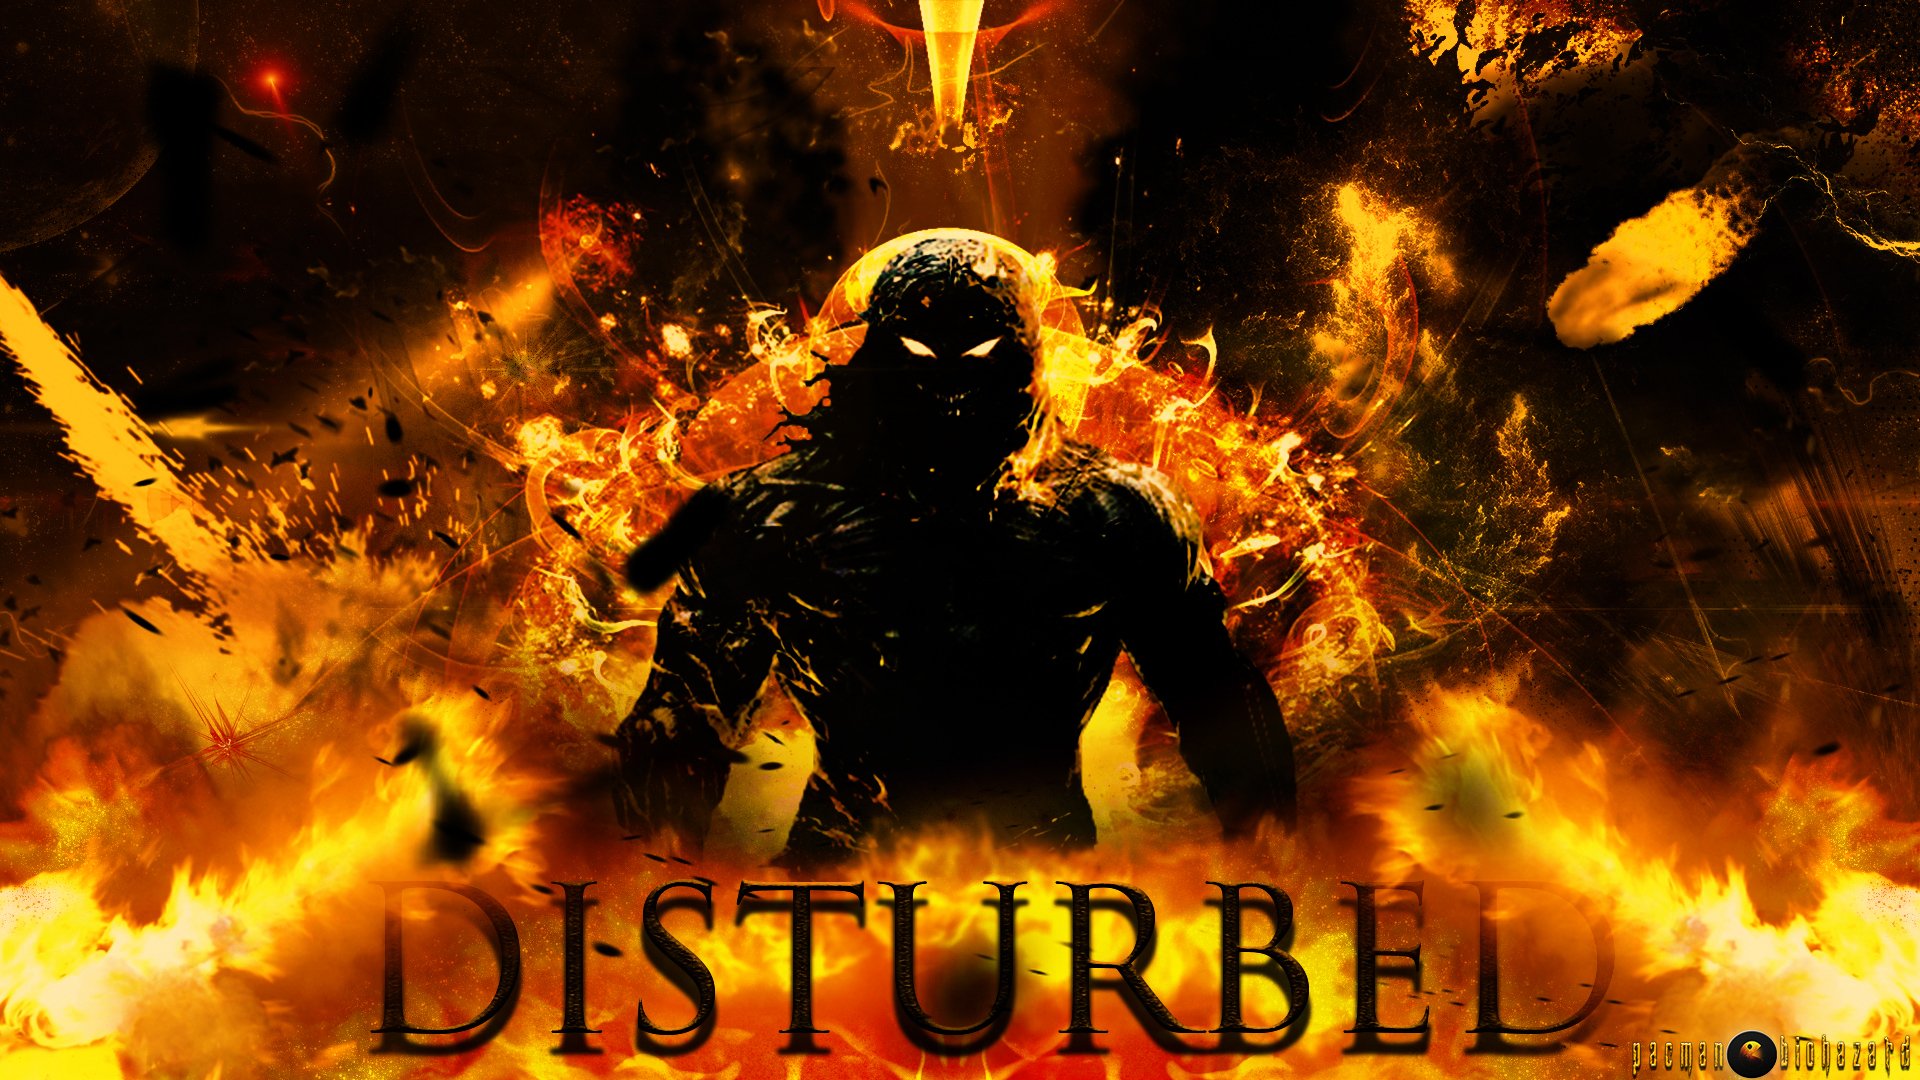 heavy metal, music, disturbed, disturbed (band) wallpaper for mobile